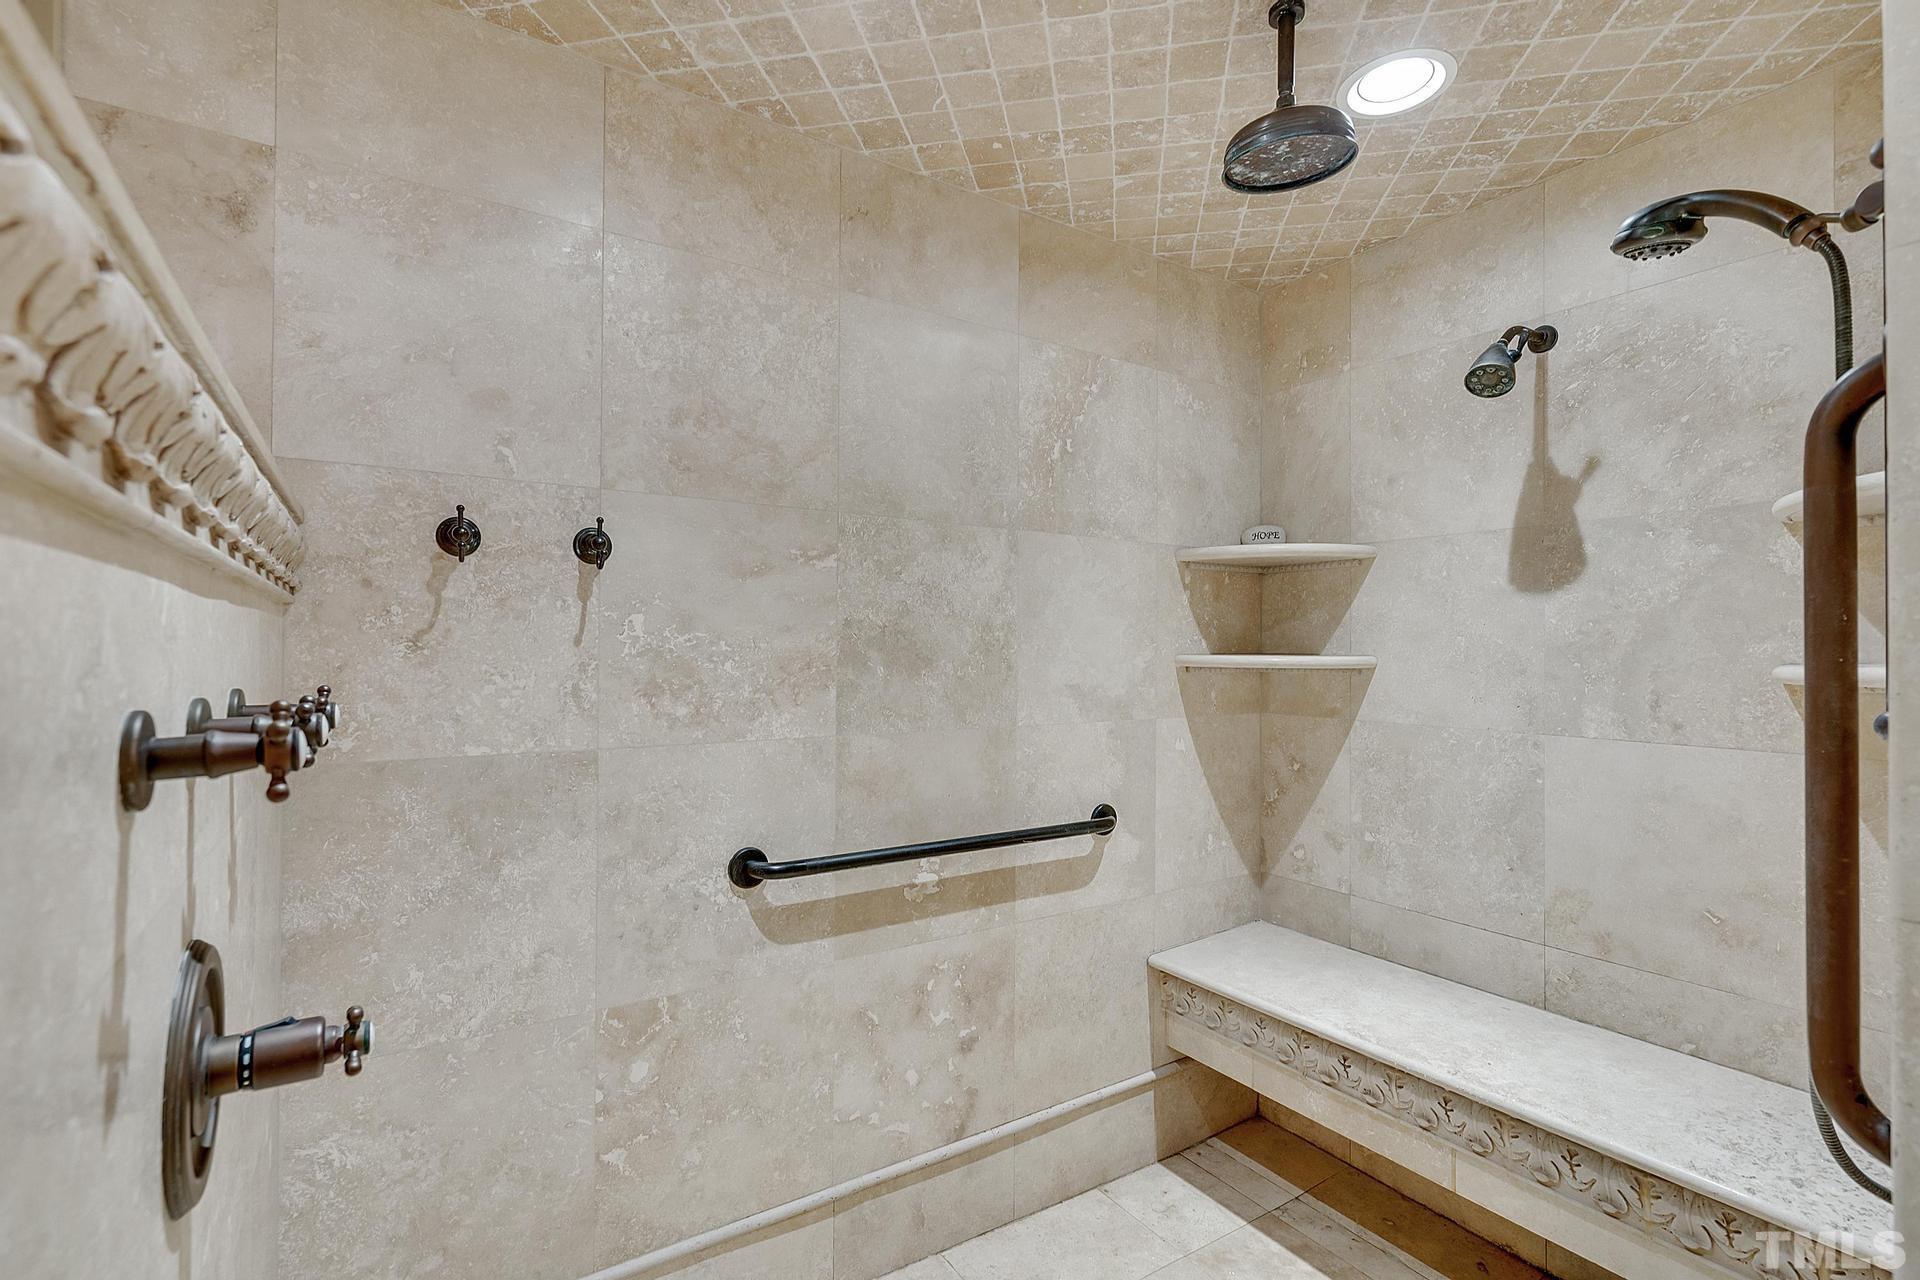 Large walk in shower with three shower heads, built in seats and towel/robe hooks.